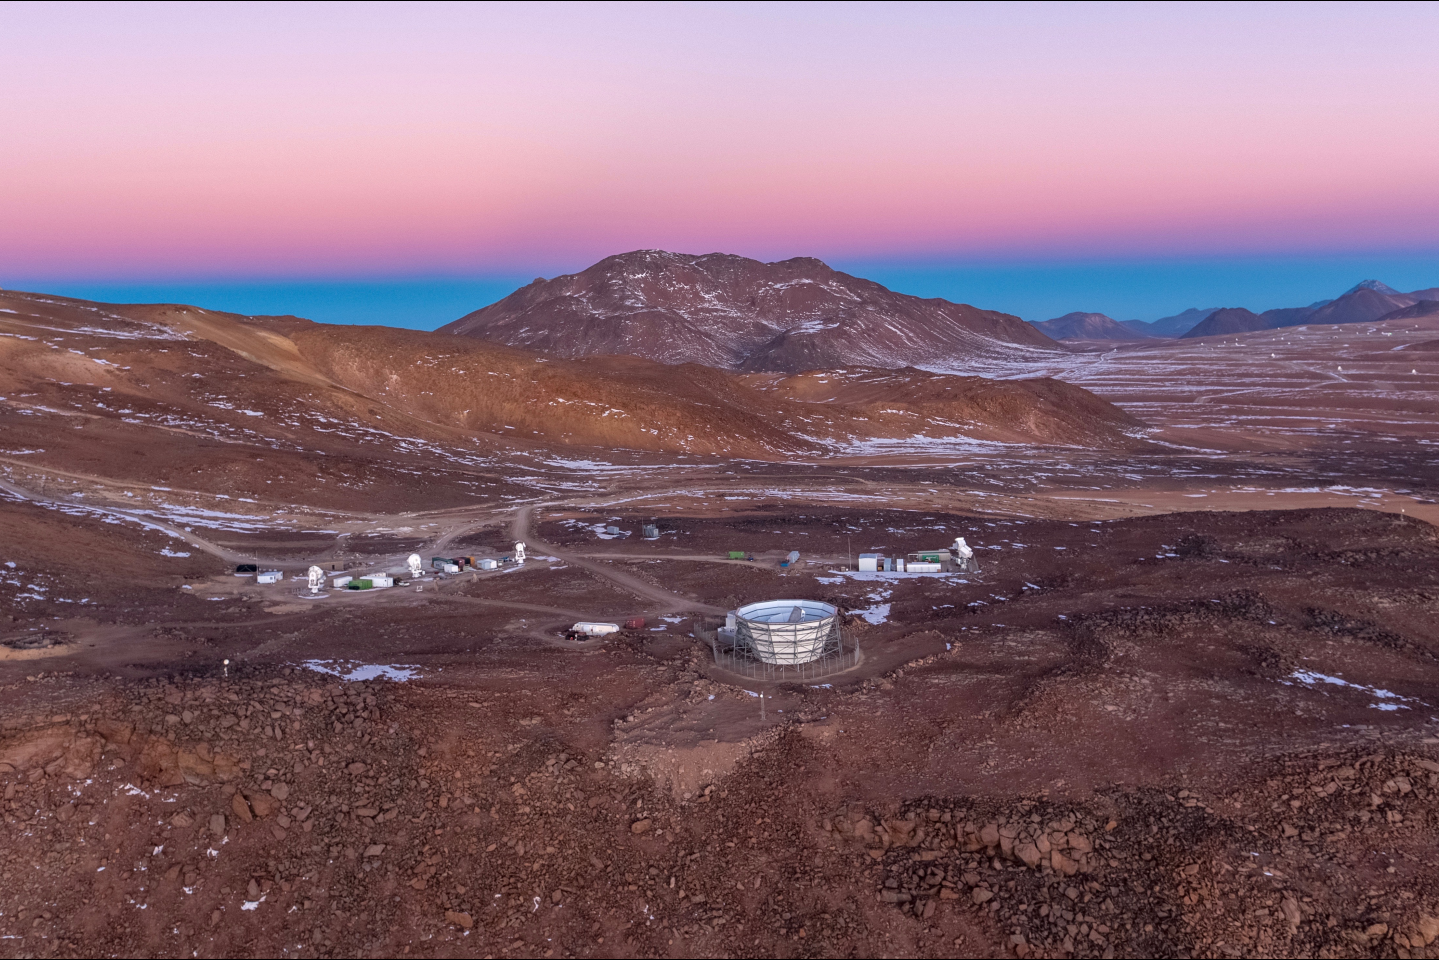 A white telescope dish is set in the desert with mountains and a colorful sky in the background.